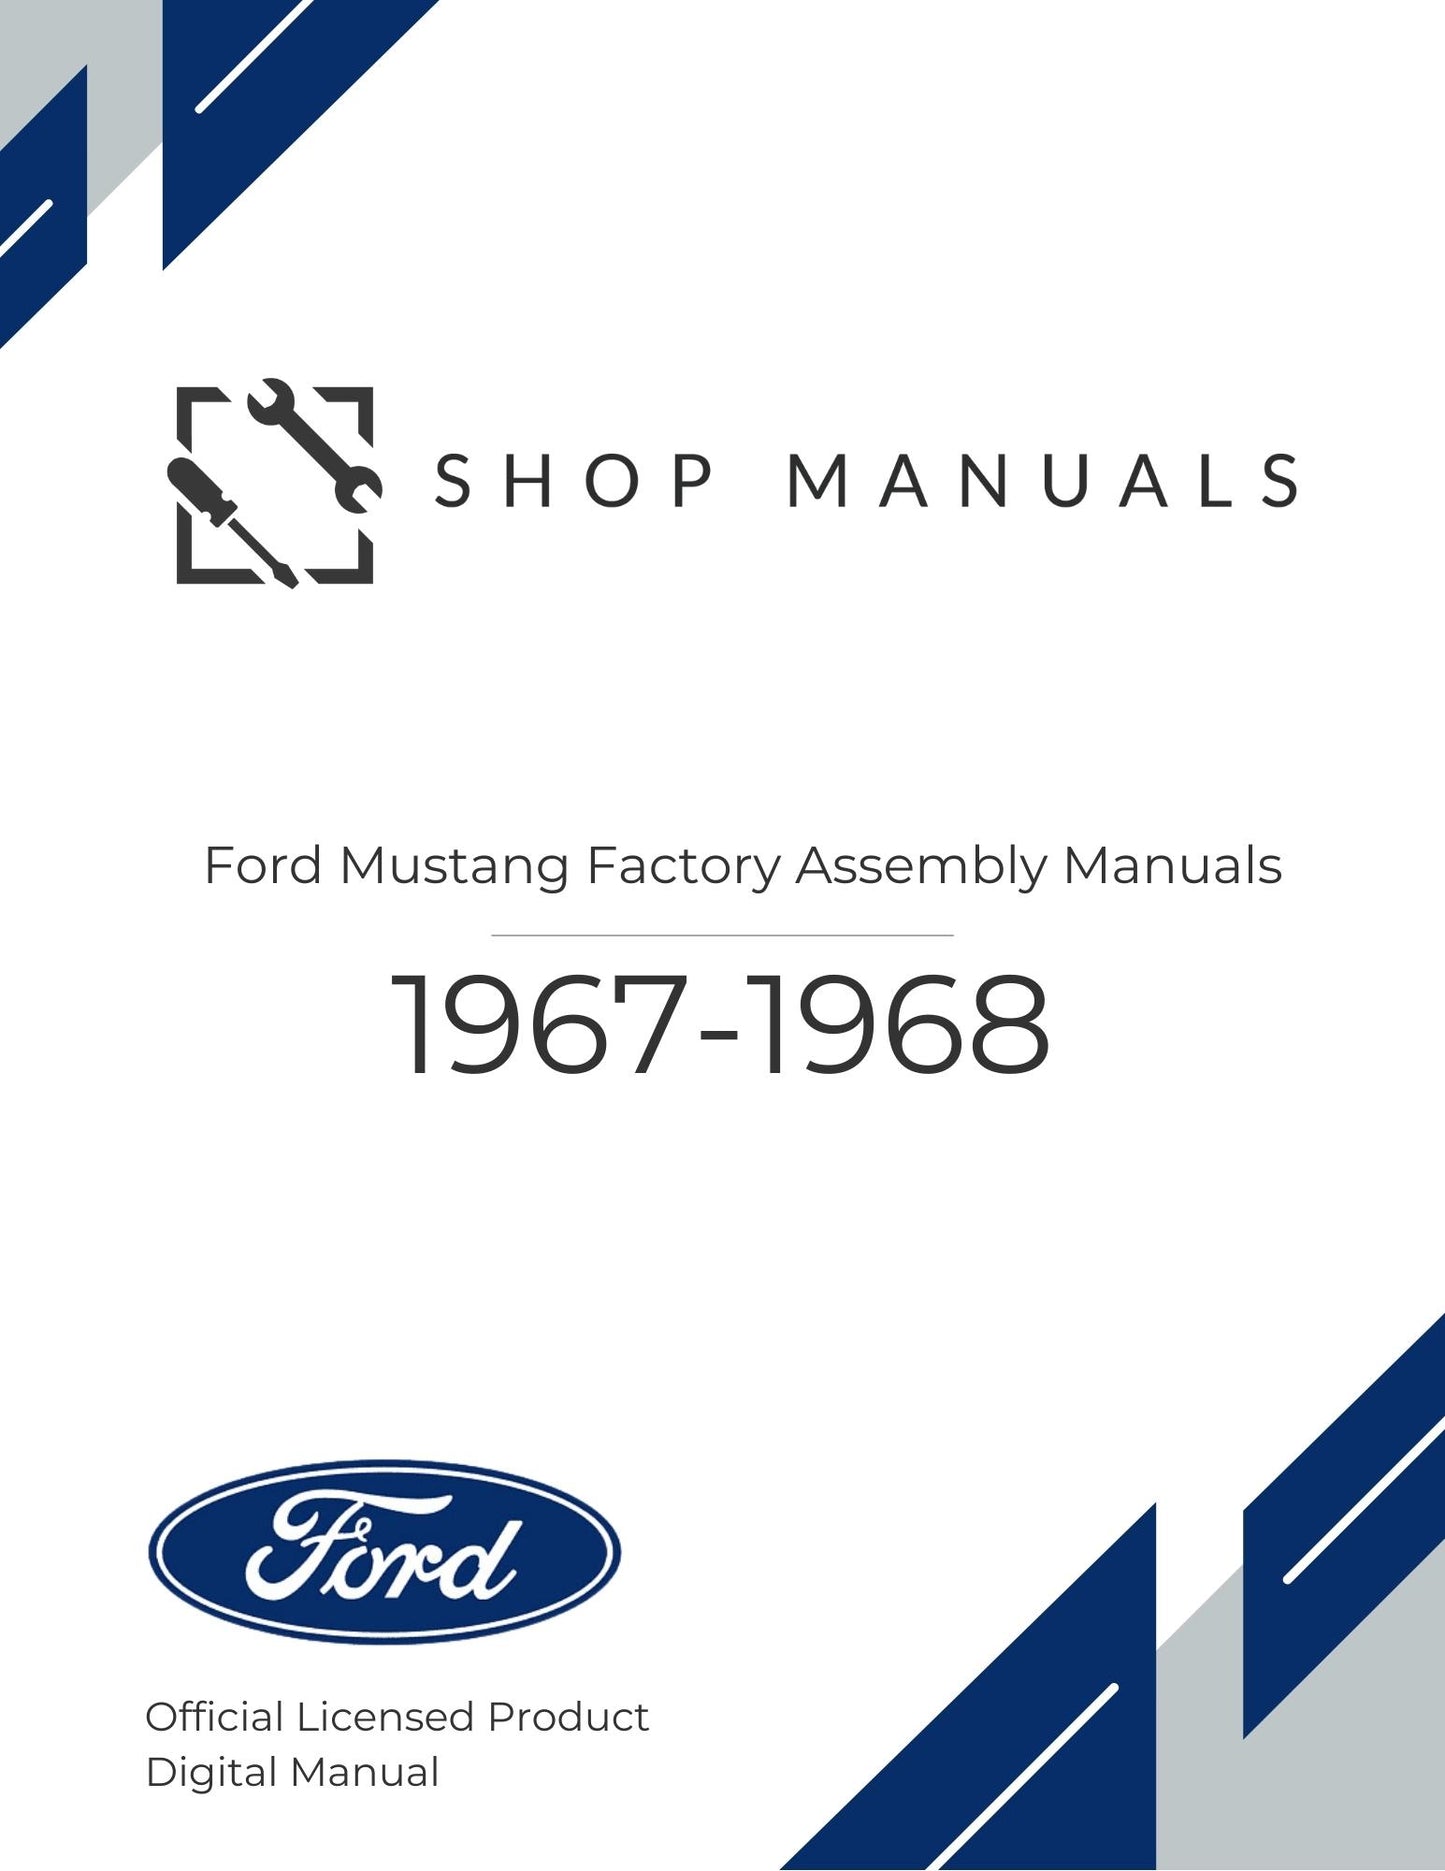 1967-1968 Ford Mustang Factory Assembly Manuals